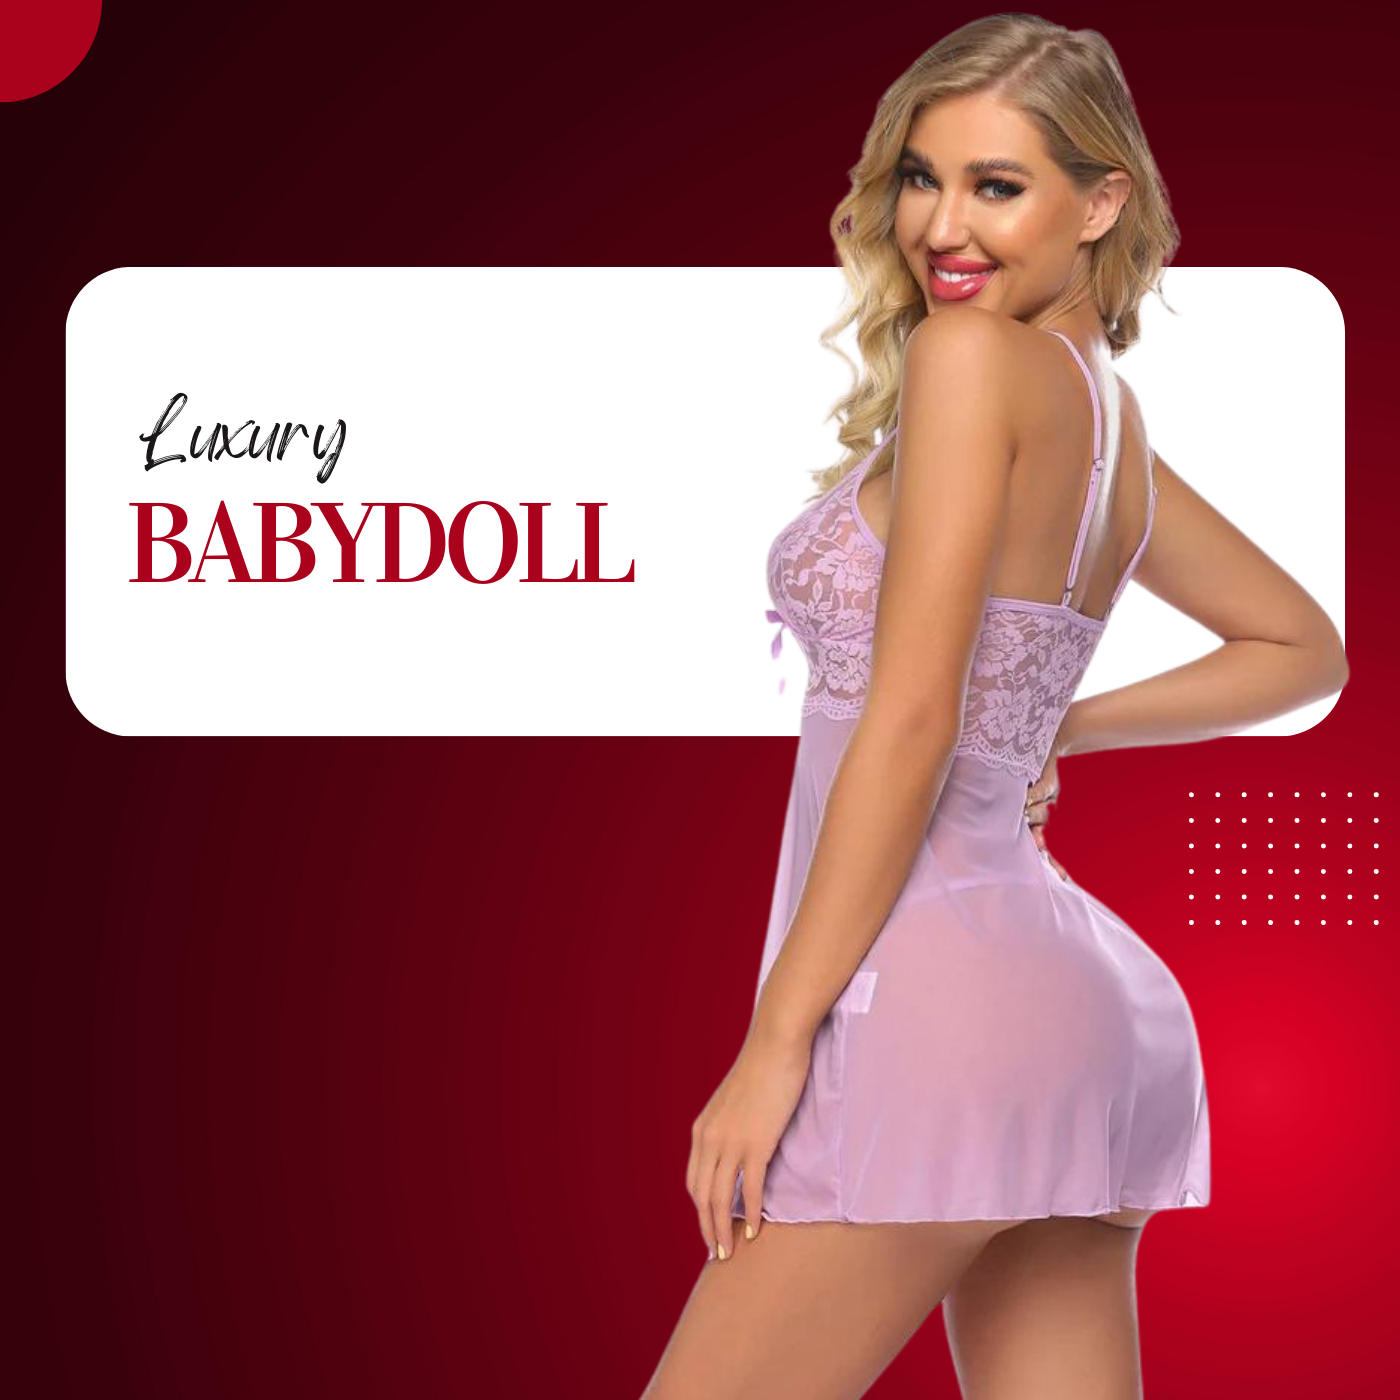 Luxury babydoll - Snazzyway India White Label Dropshipping Products